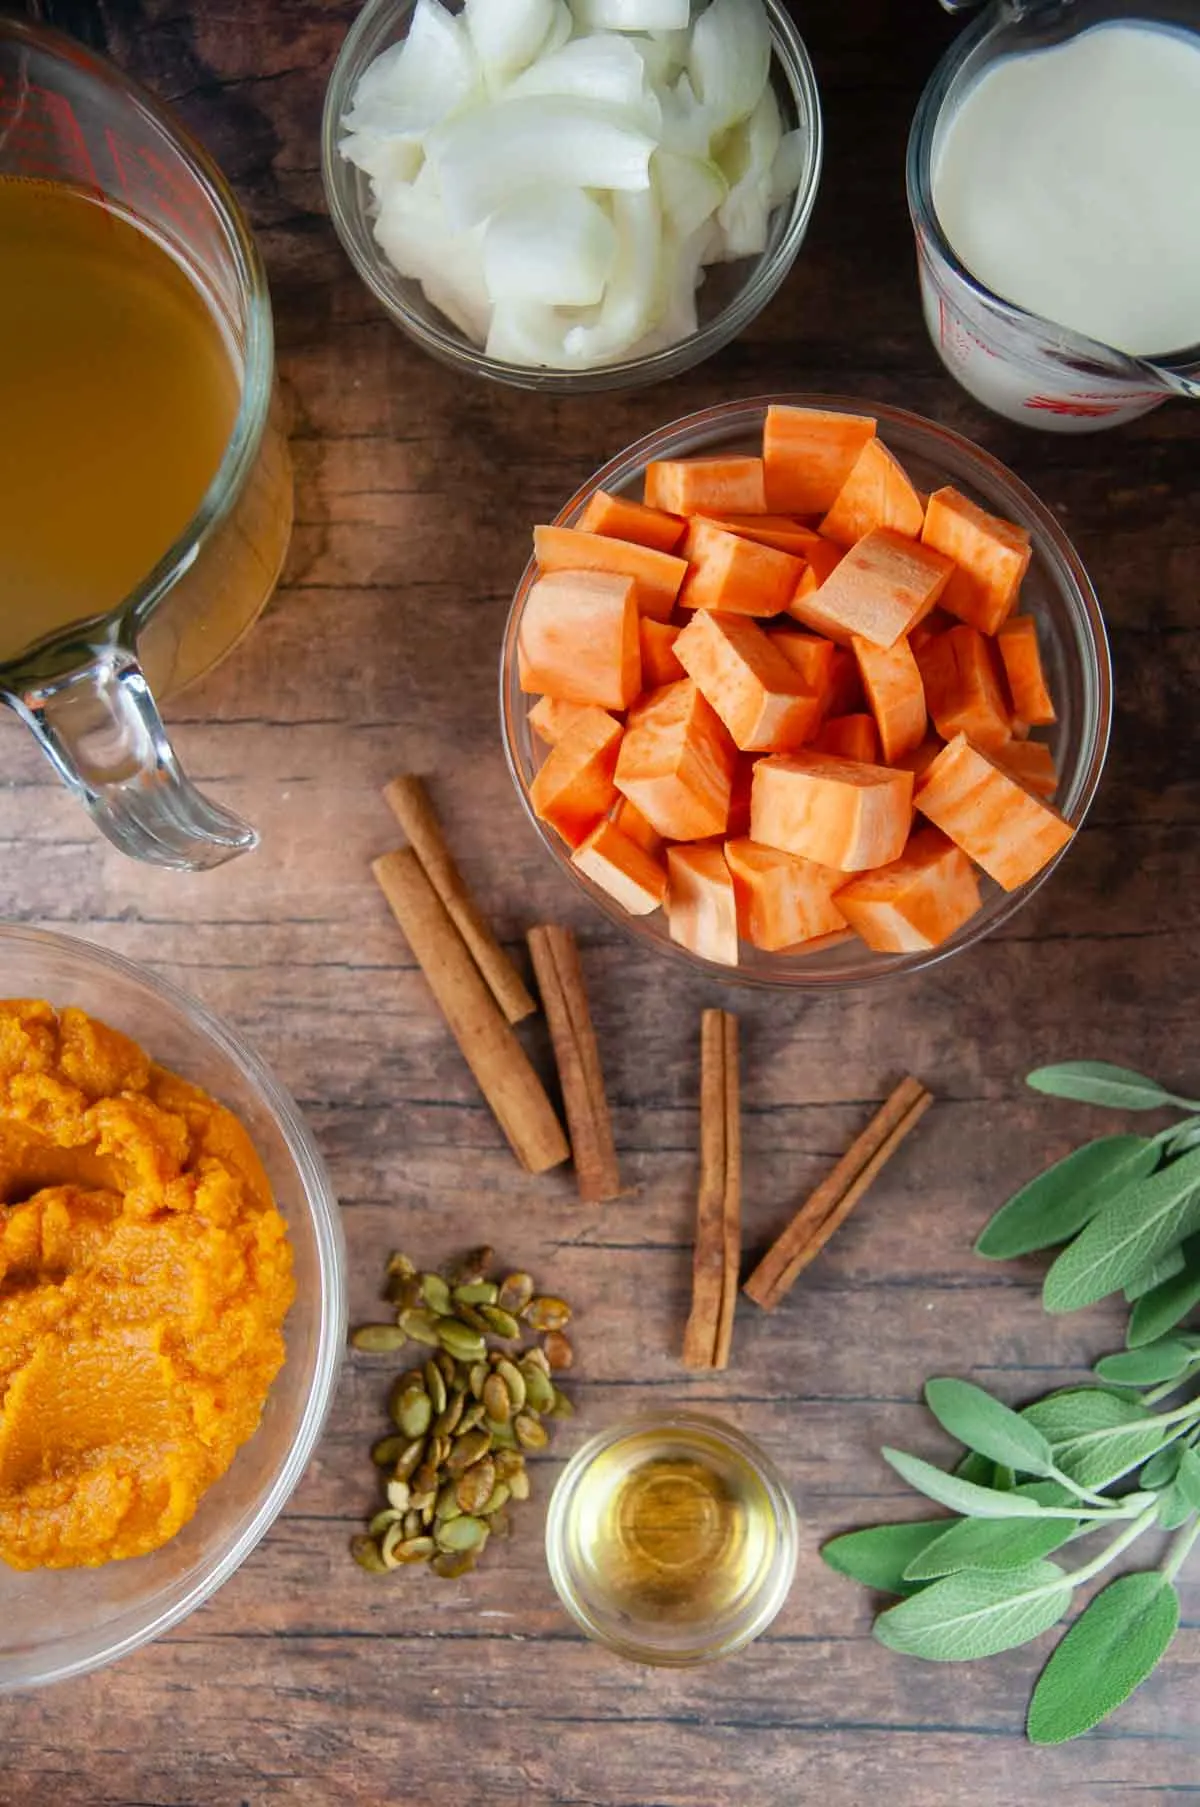 Ingredients for Sweet Potato and Pumpkin Soup: Pumpkin, Sweet Potato, Onions, Broth, Spices, Olive Oil, and Cream